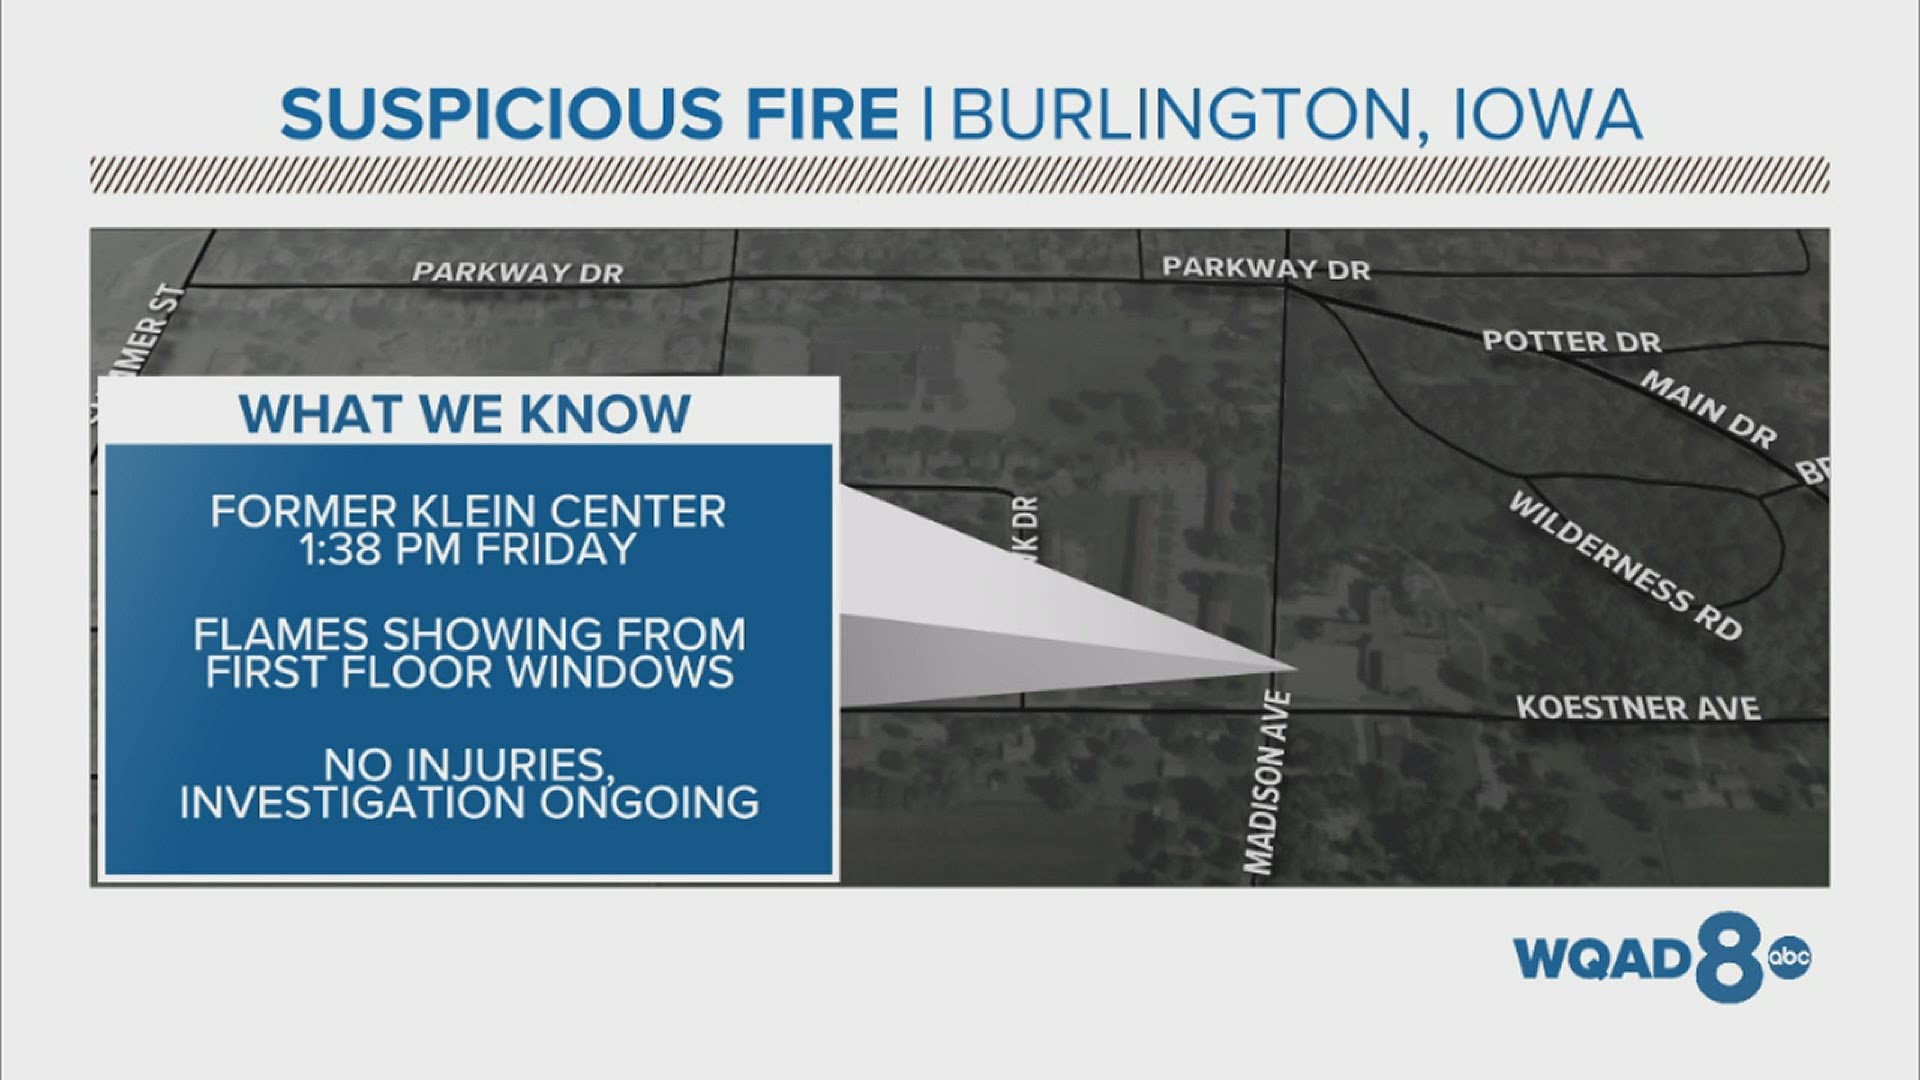 A fire that broke out at the former Klein Center in Burlington is considered suspicious, according to Fire Marshal Mark Crooks.